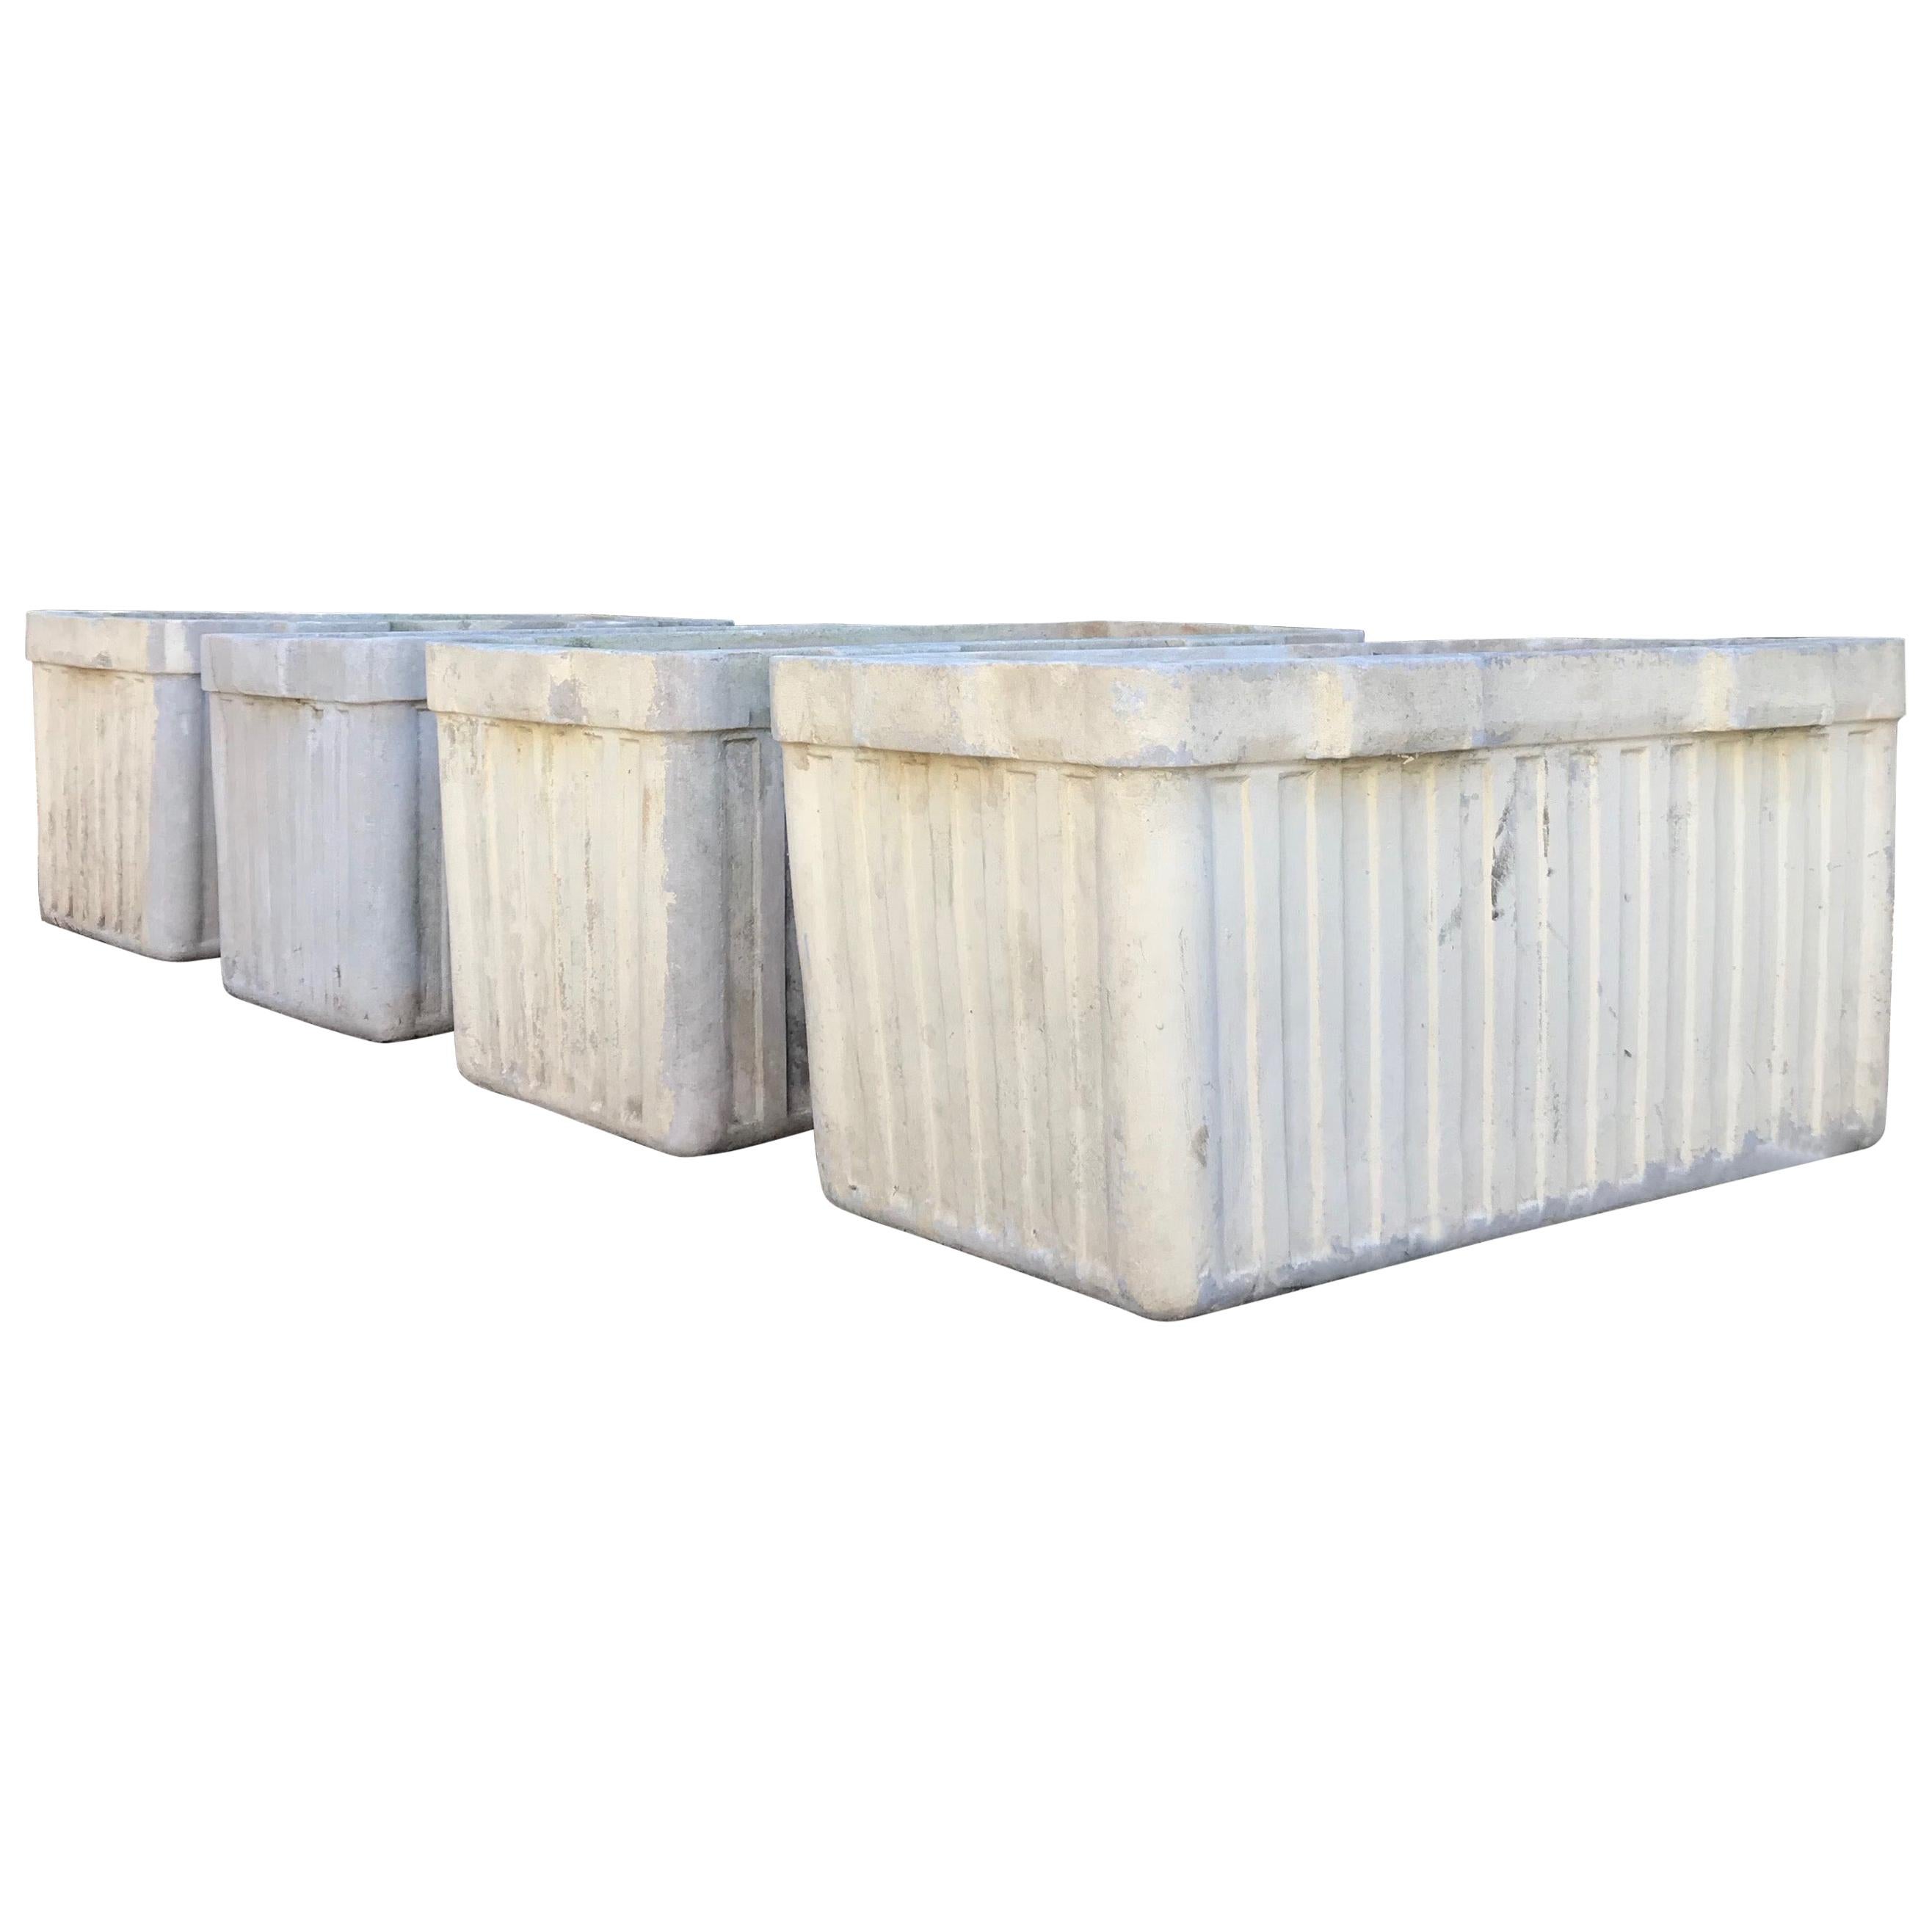 Very Large Ribbed Rectangular Willy Guhl Planters by Eternit For Sale